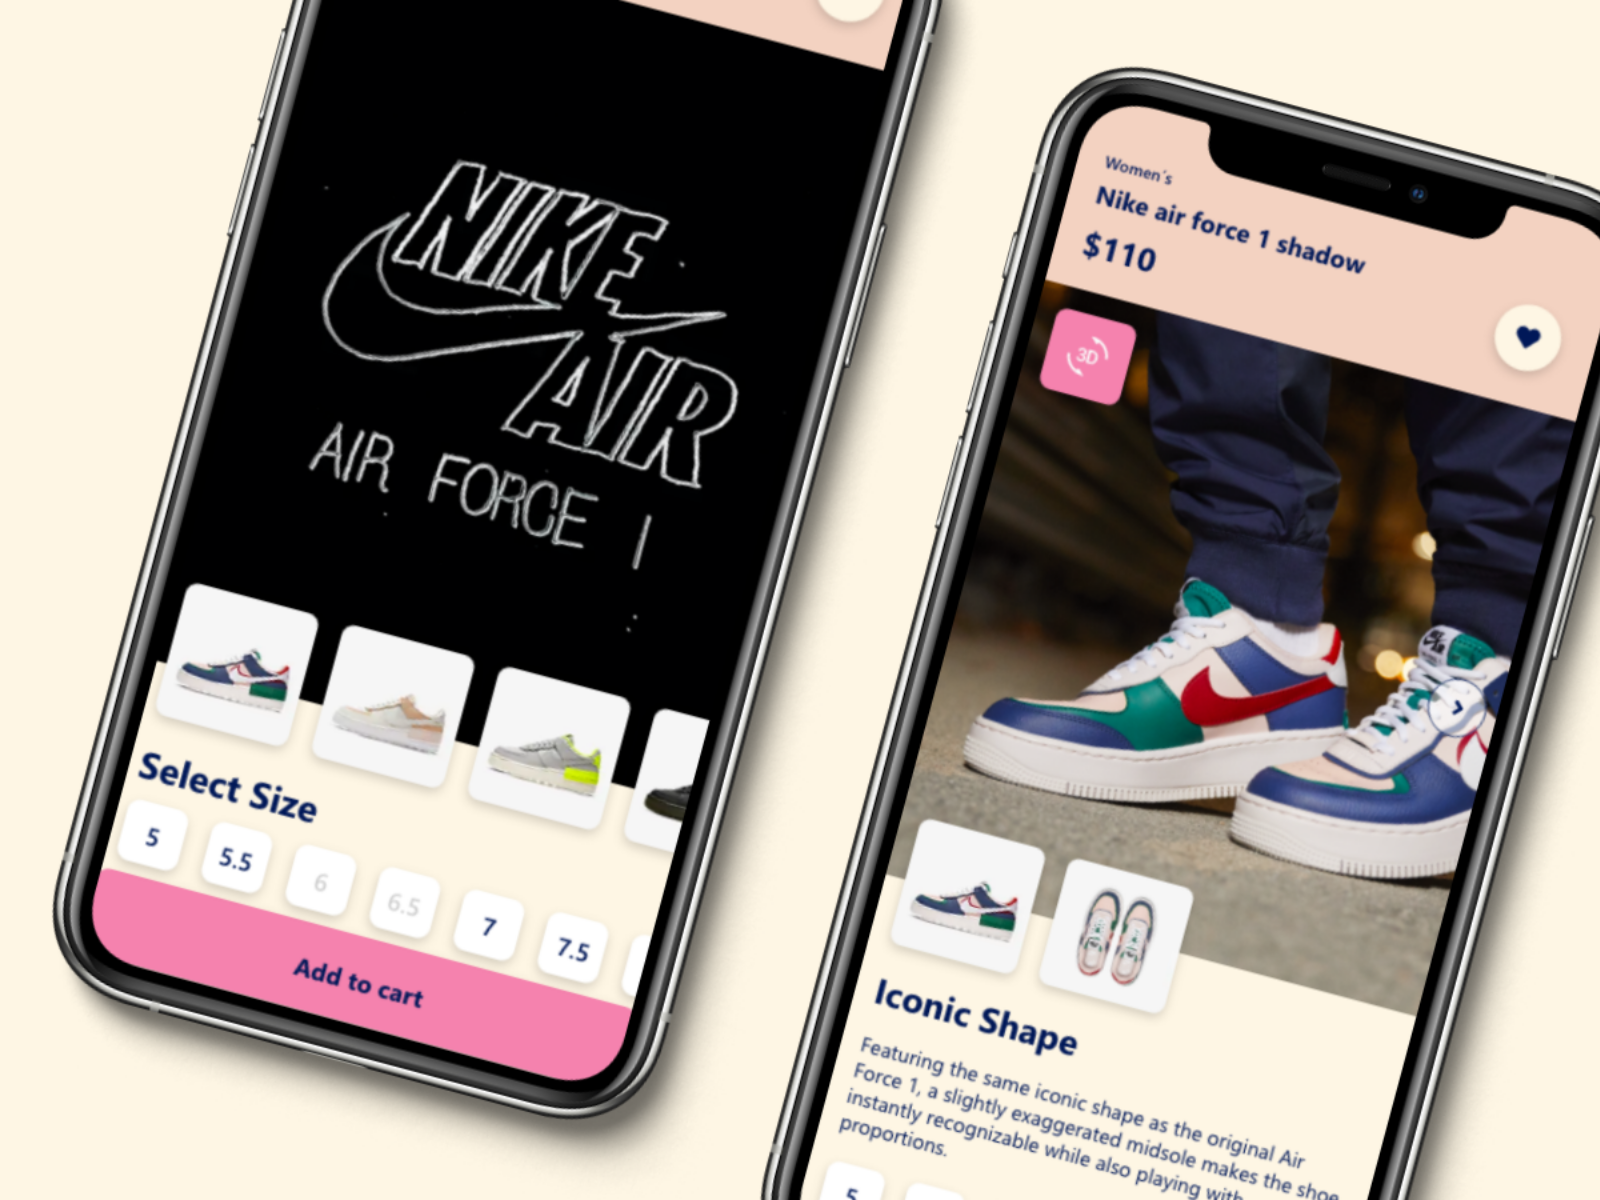 Nike Ui Air Force 1 Shadow By Elba L Sindoni On Dribbble Images, Photos, Reviews